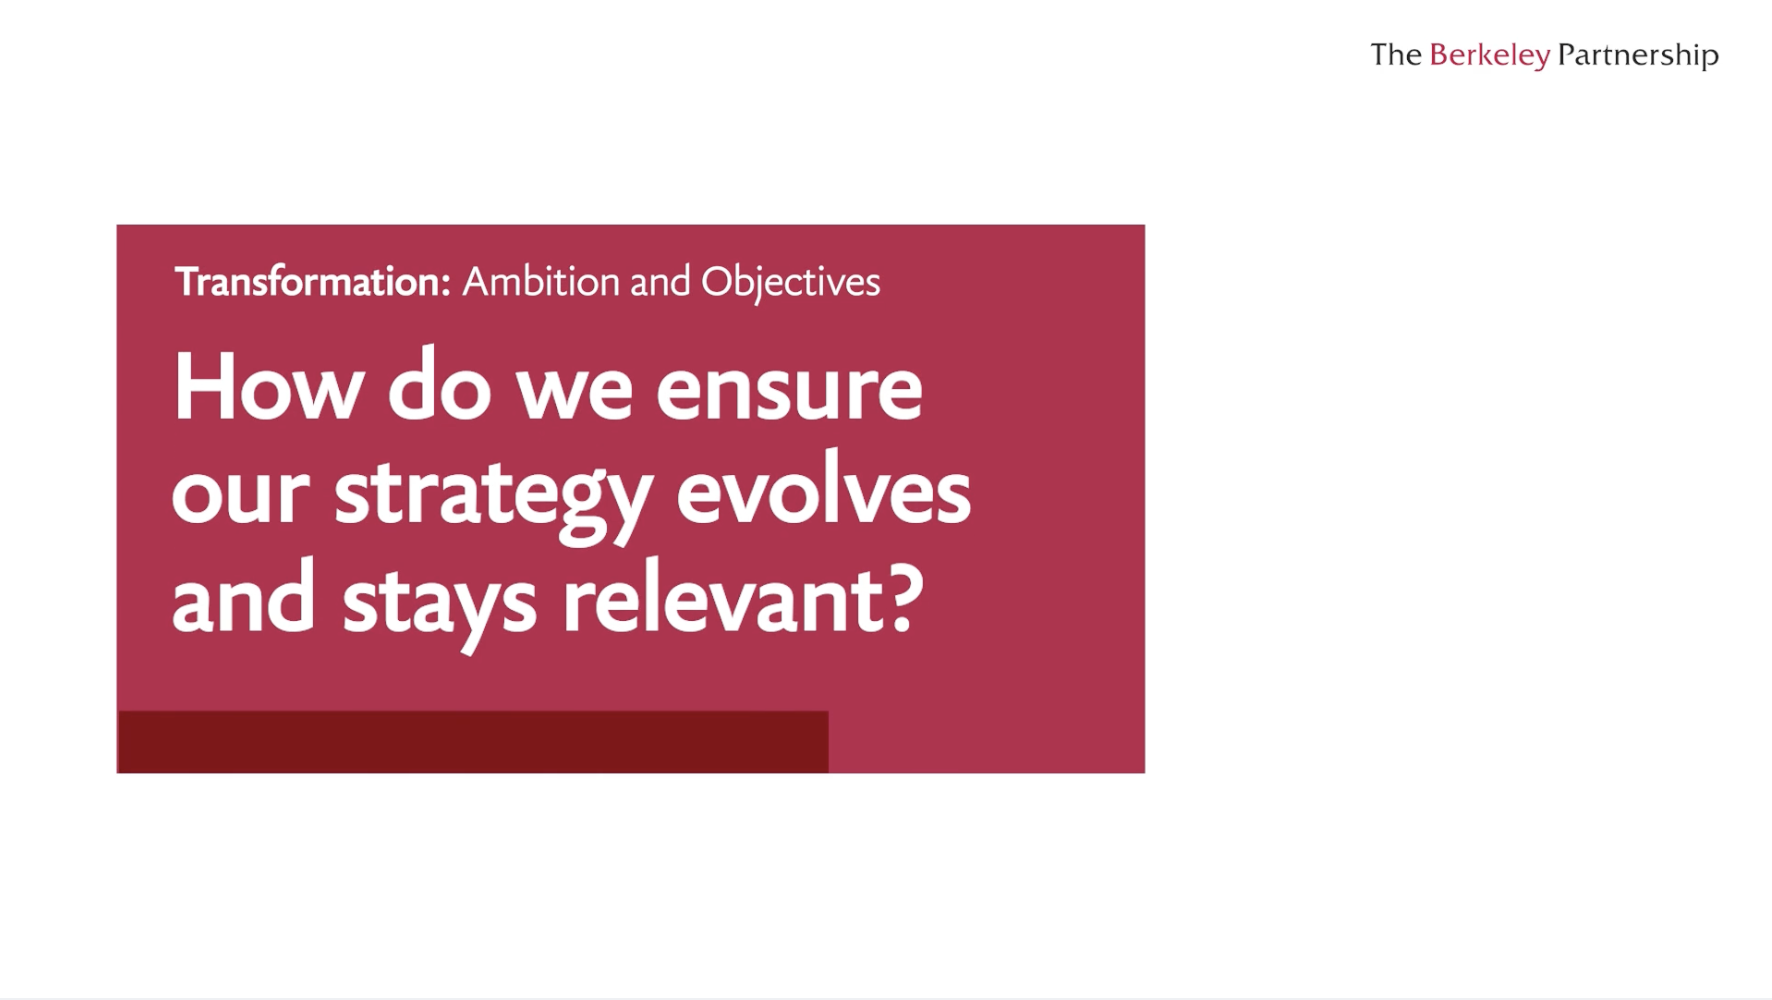 How do you ensure your strategy evolves and stays relevant?